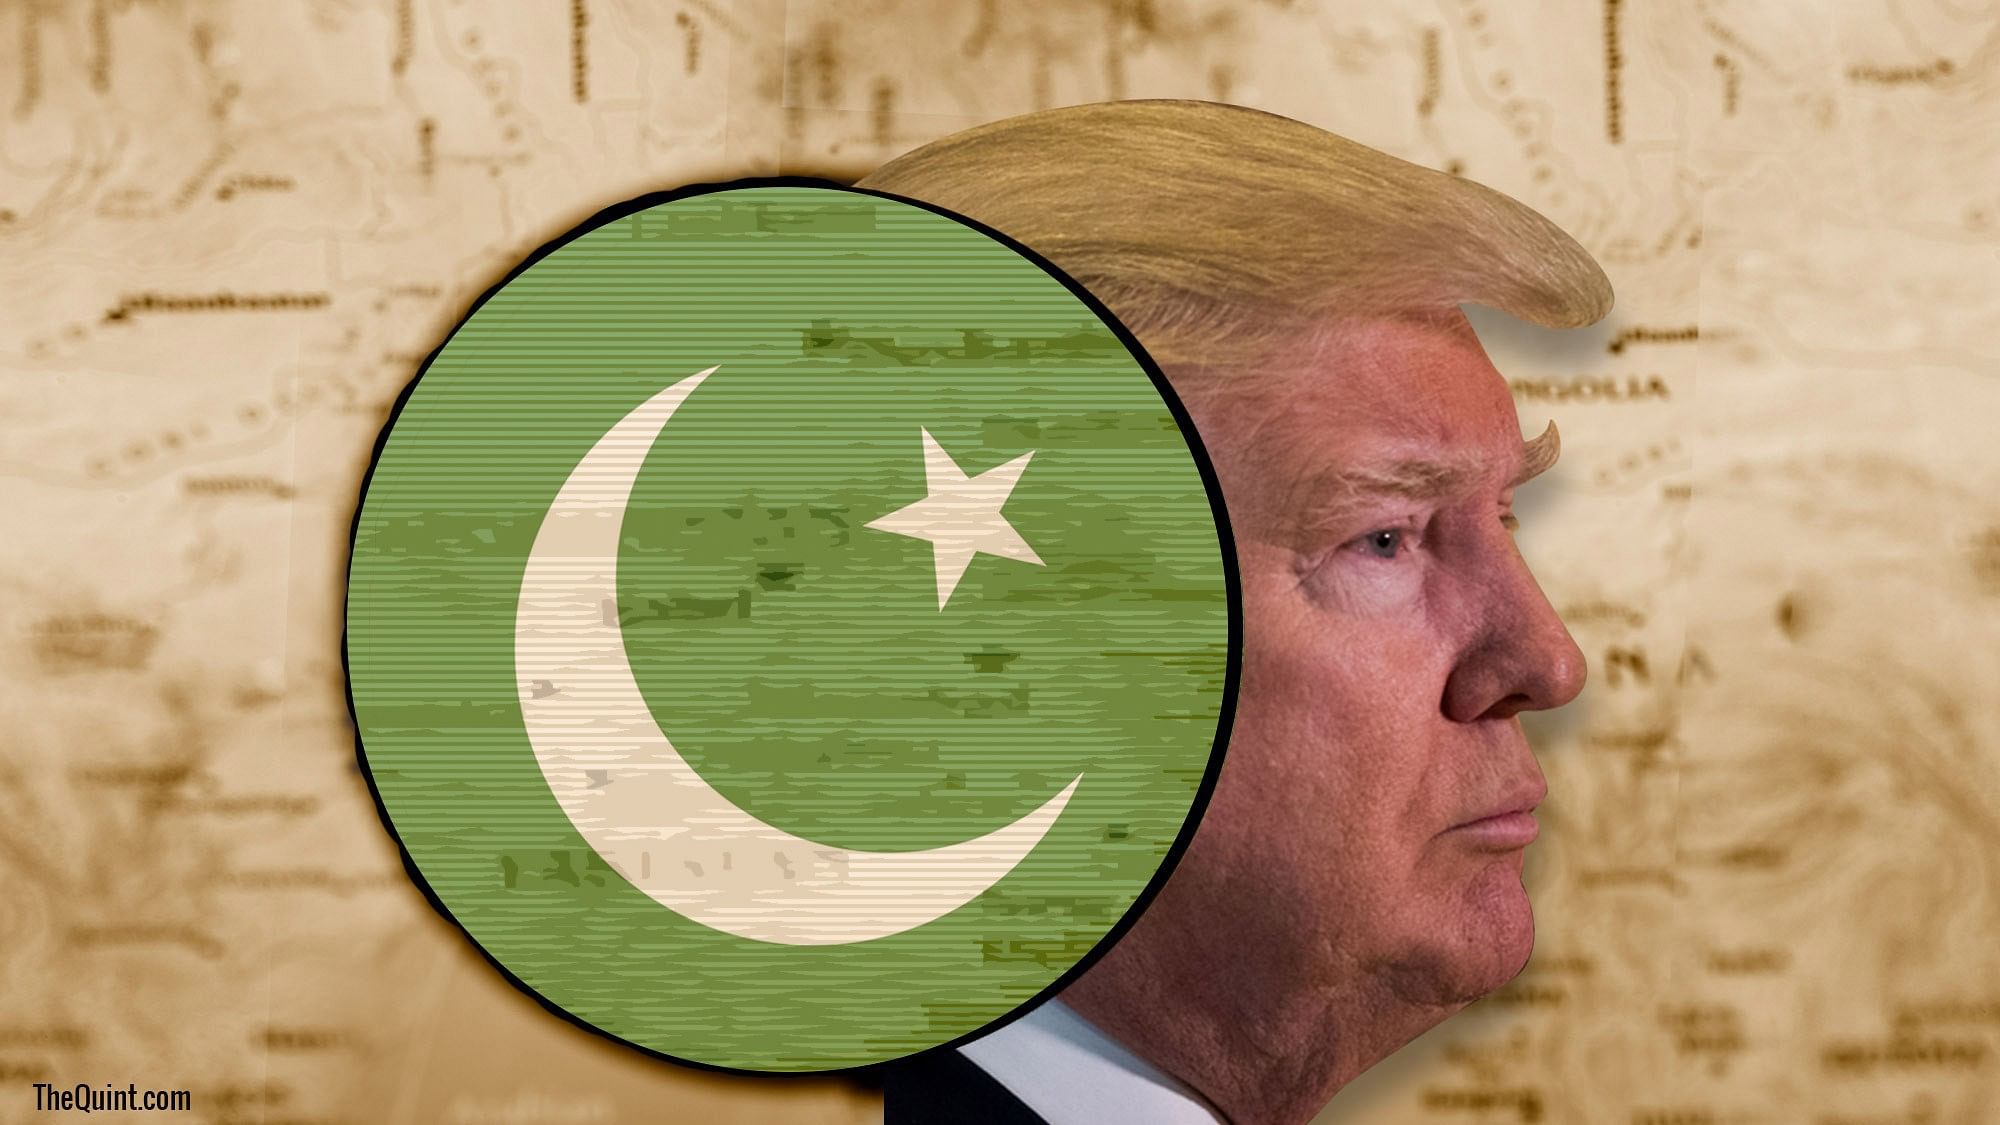 Trump took to Twitter to voice his disappointment, saying that Pakistan has taken US leaders for fools.